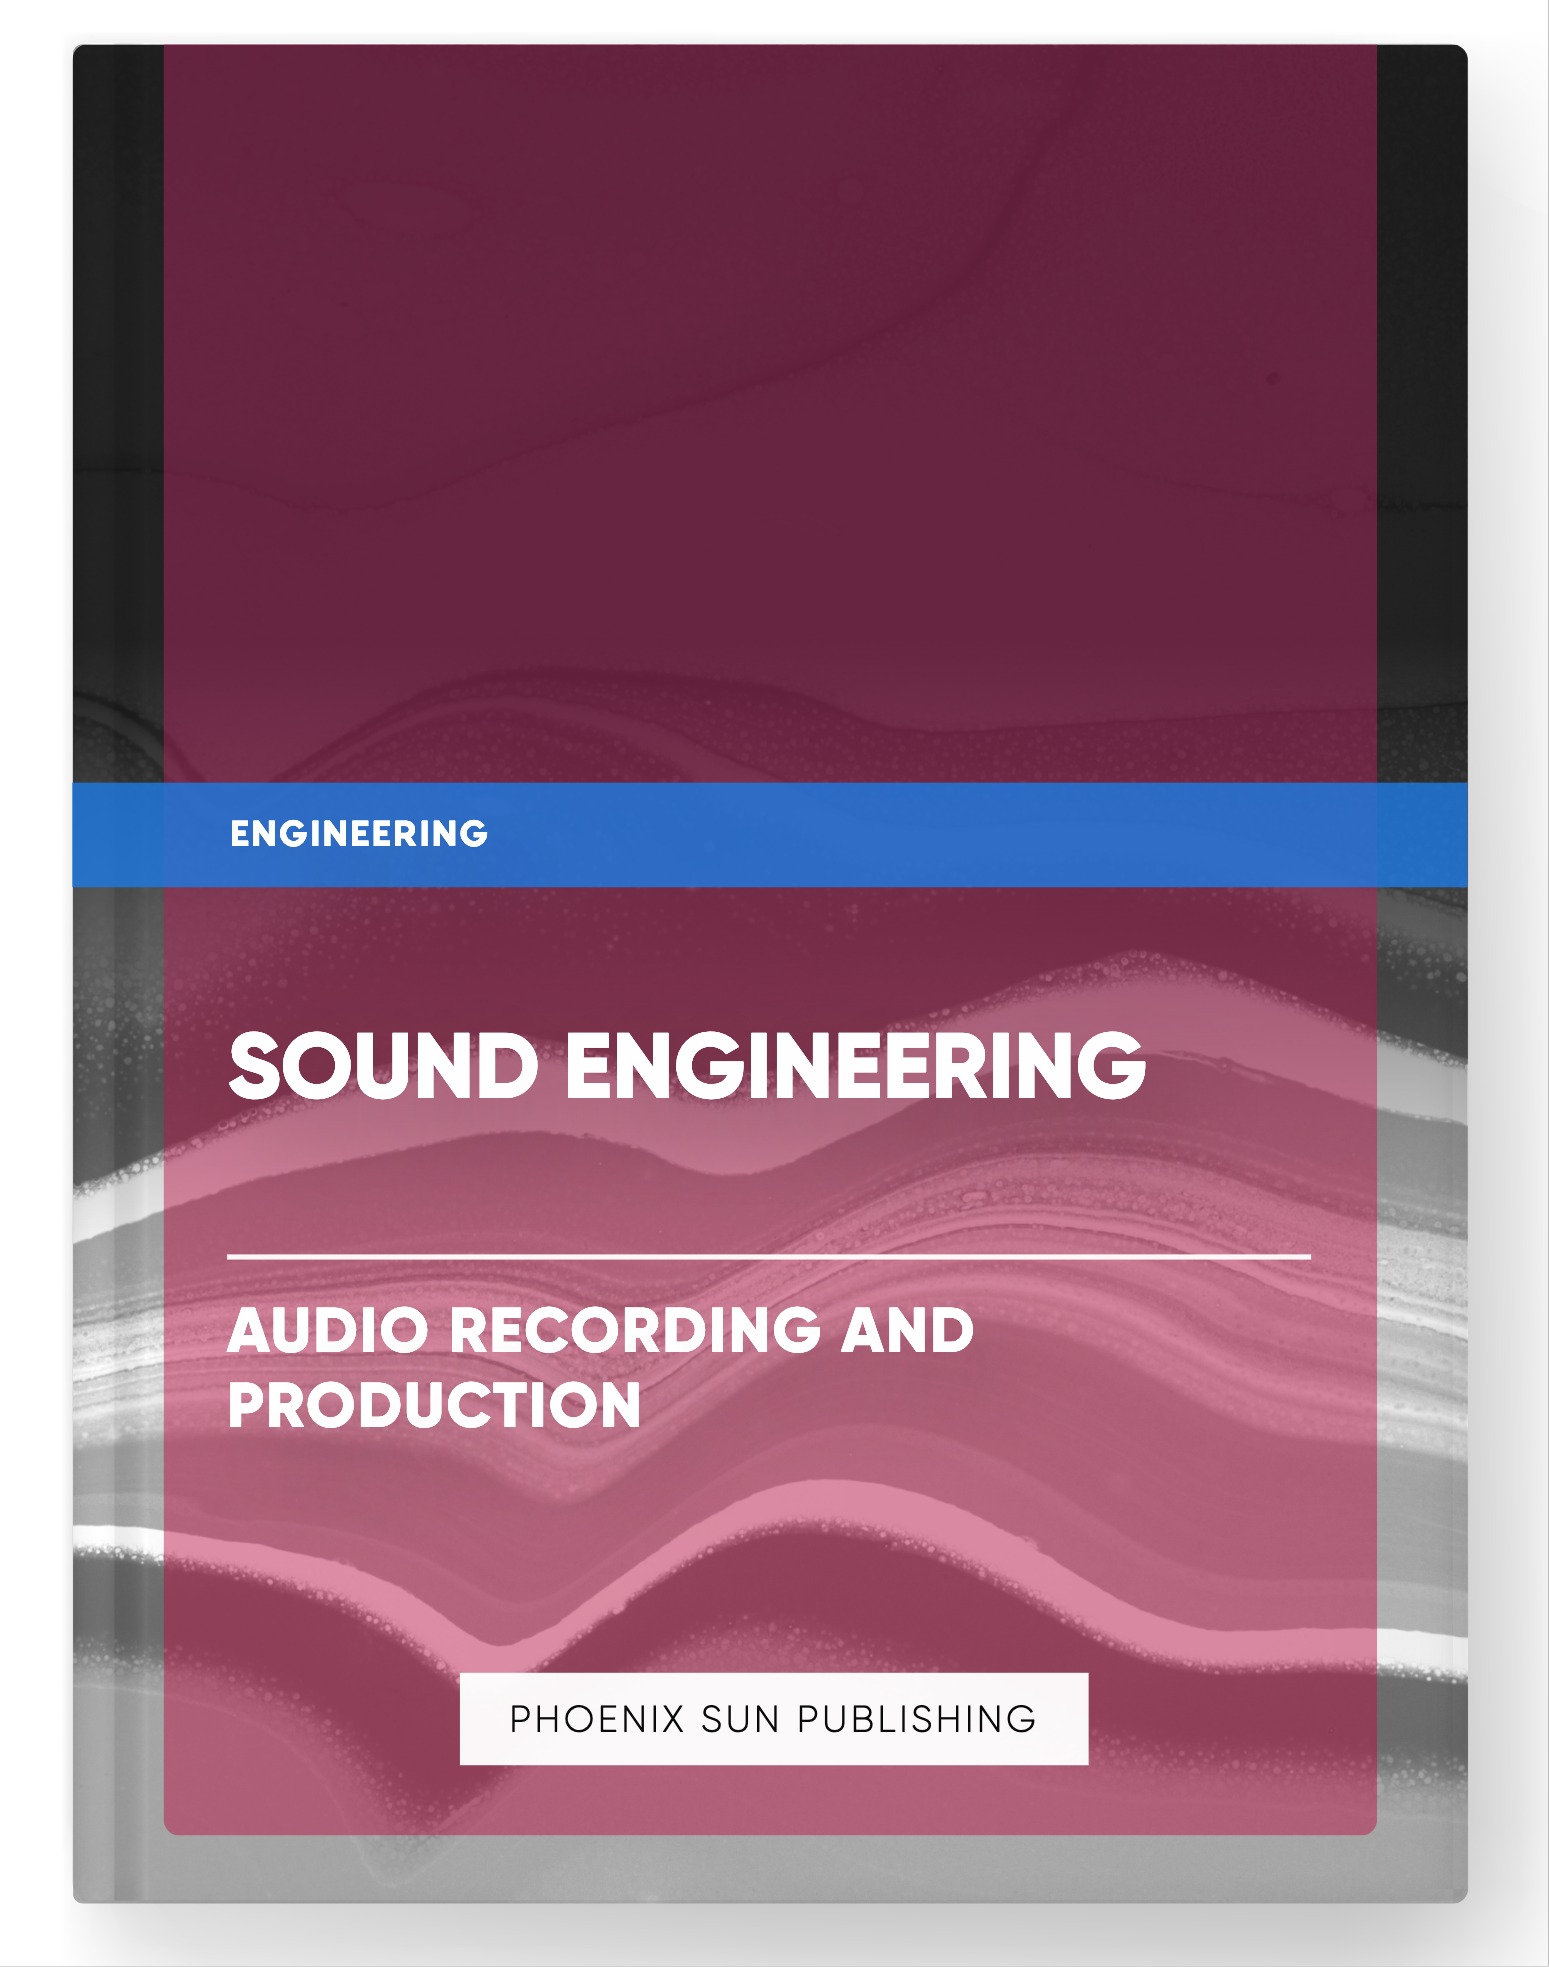 Sound Engineering – Audio Recording and Production